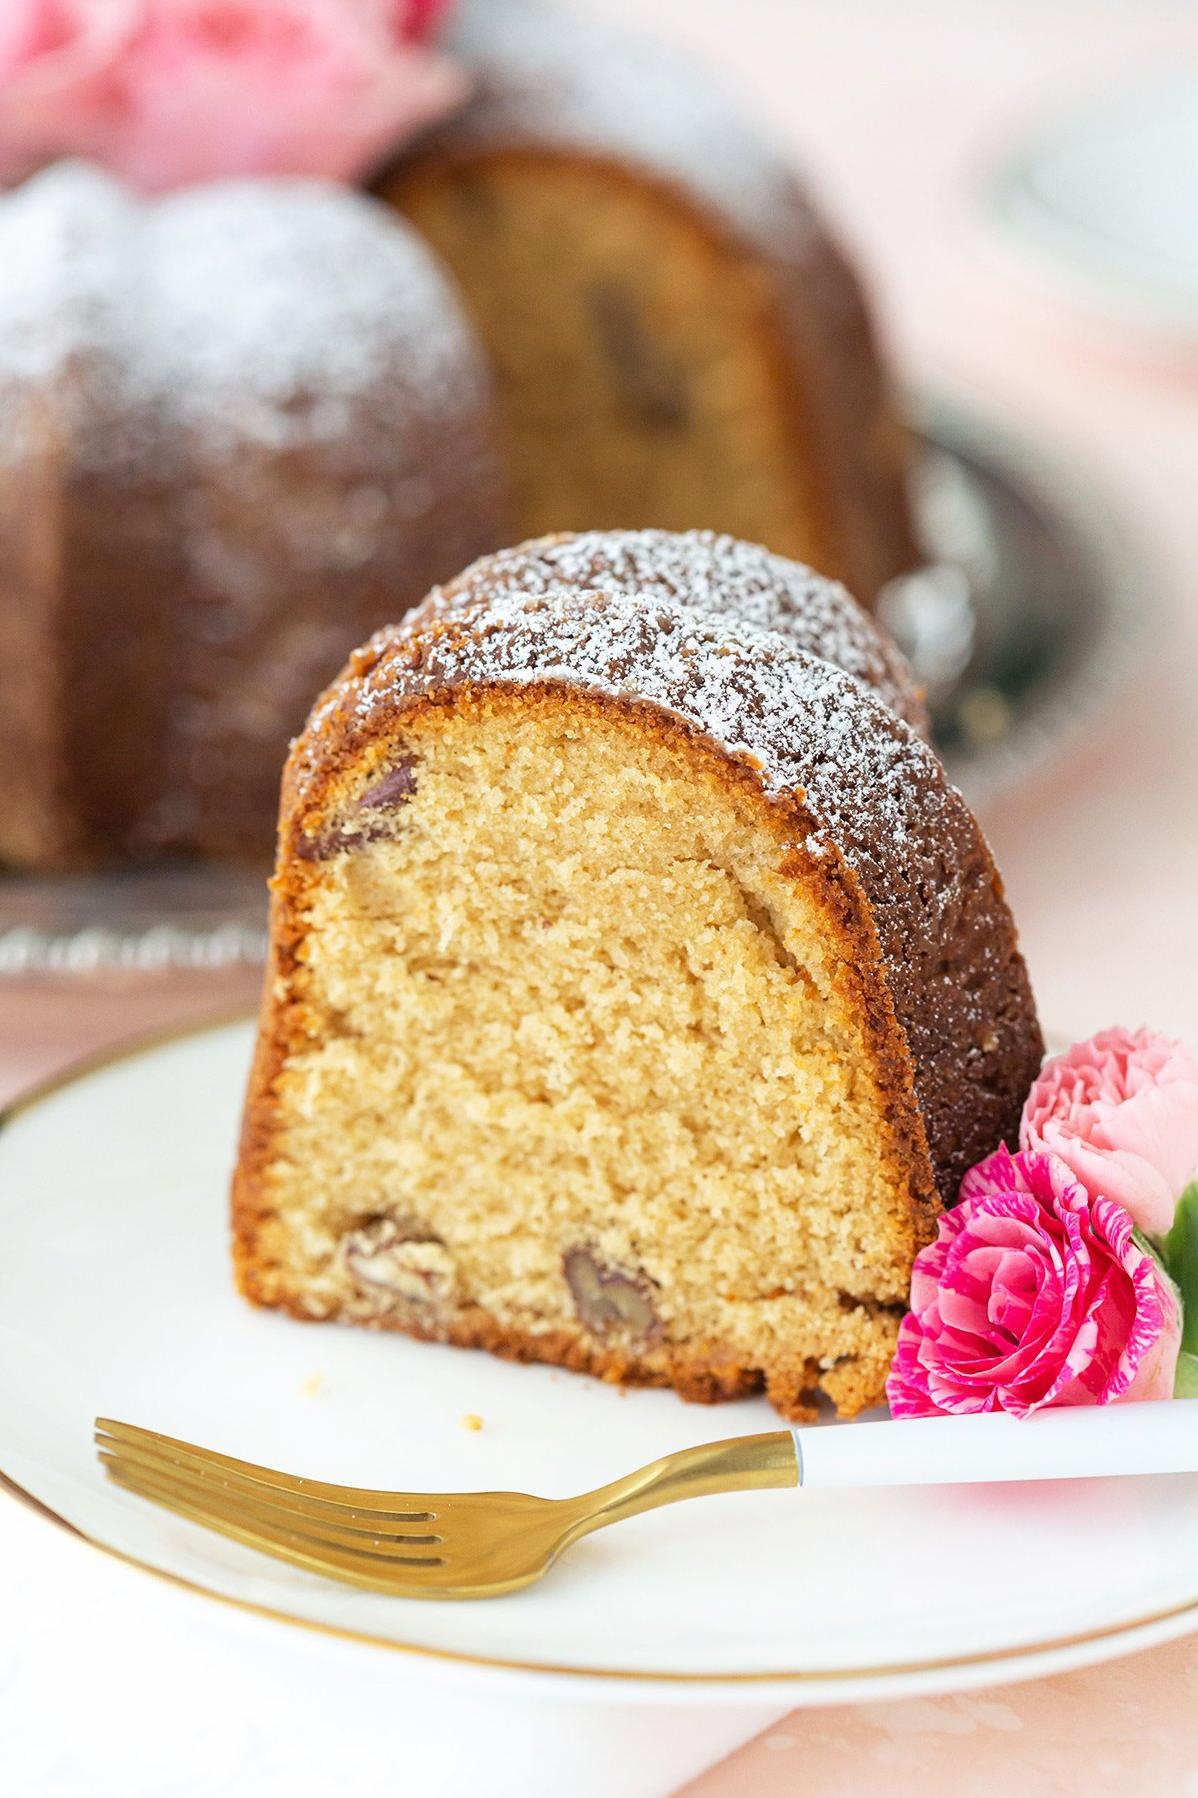  You won't find a more comforting dessert than a slice of brown sugar pound cake with a dollop of whipped